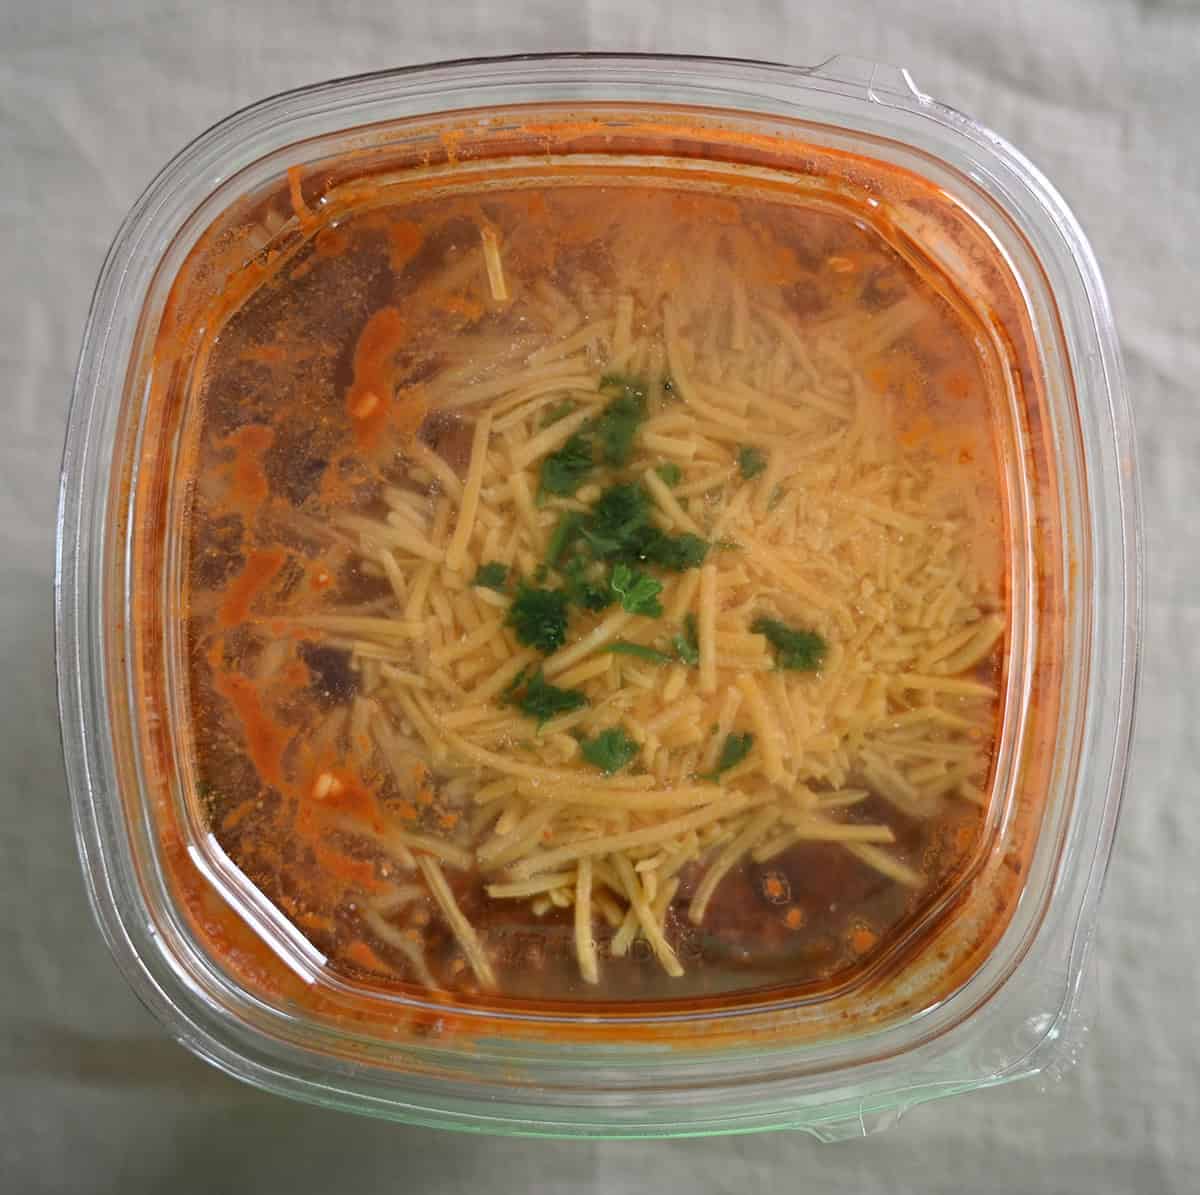 Top down image of the Costco Kirkland Signature Beef Chili container showing what the chili looks like in the container. 